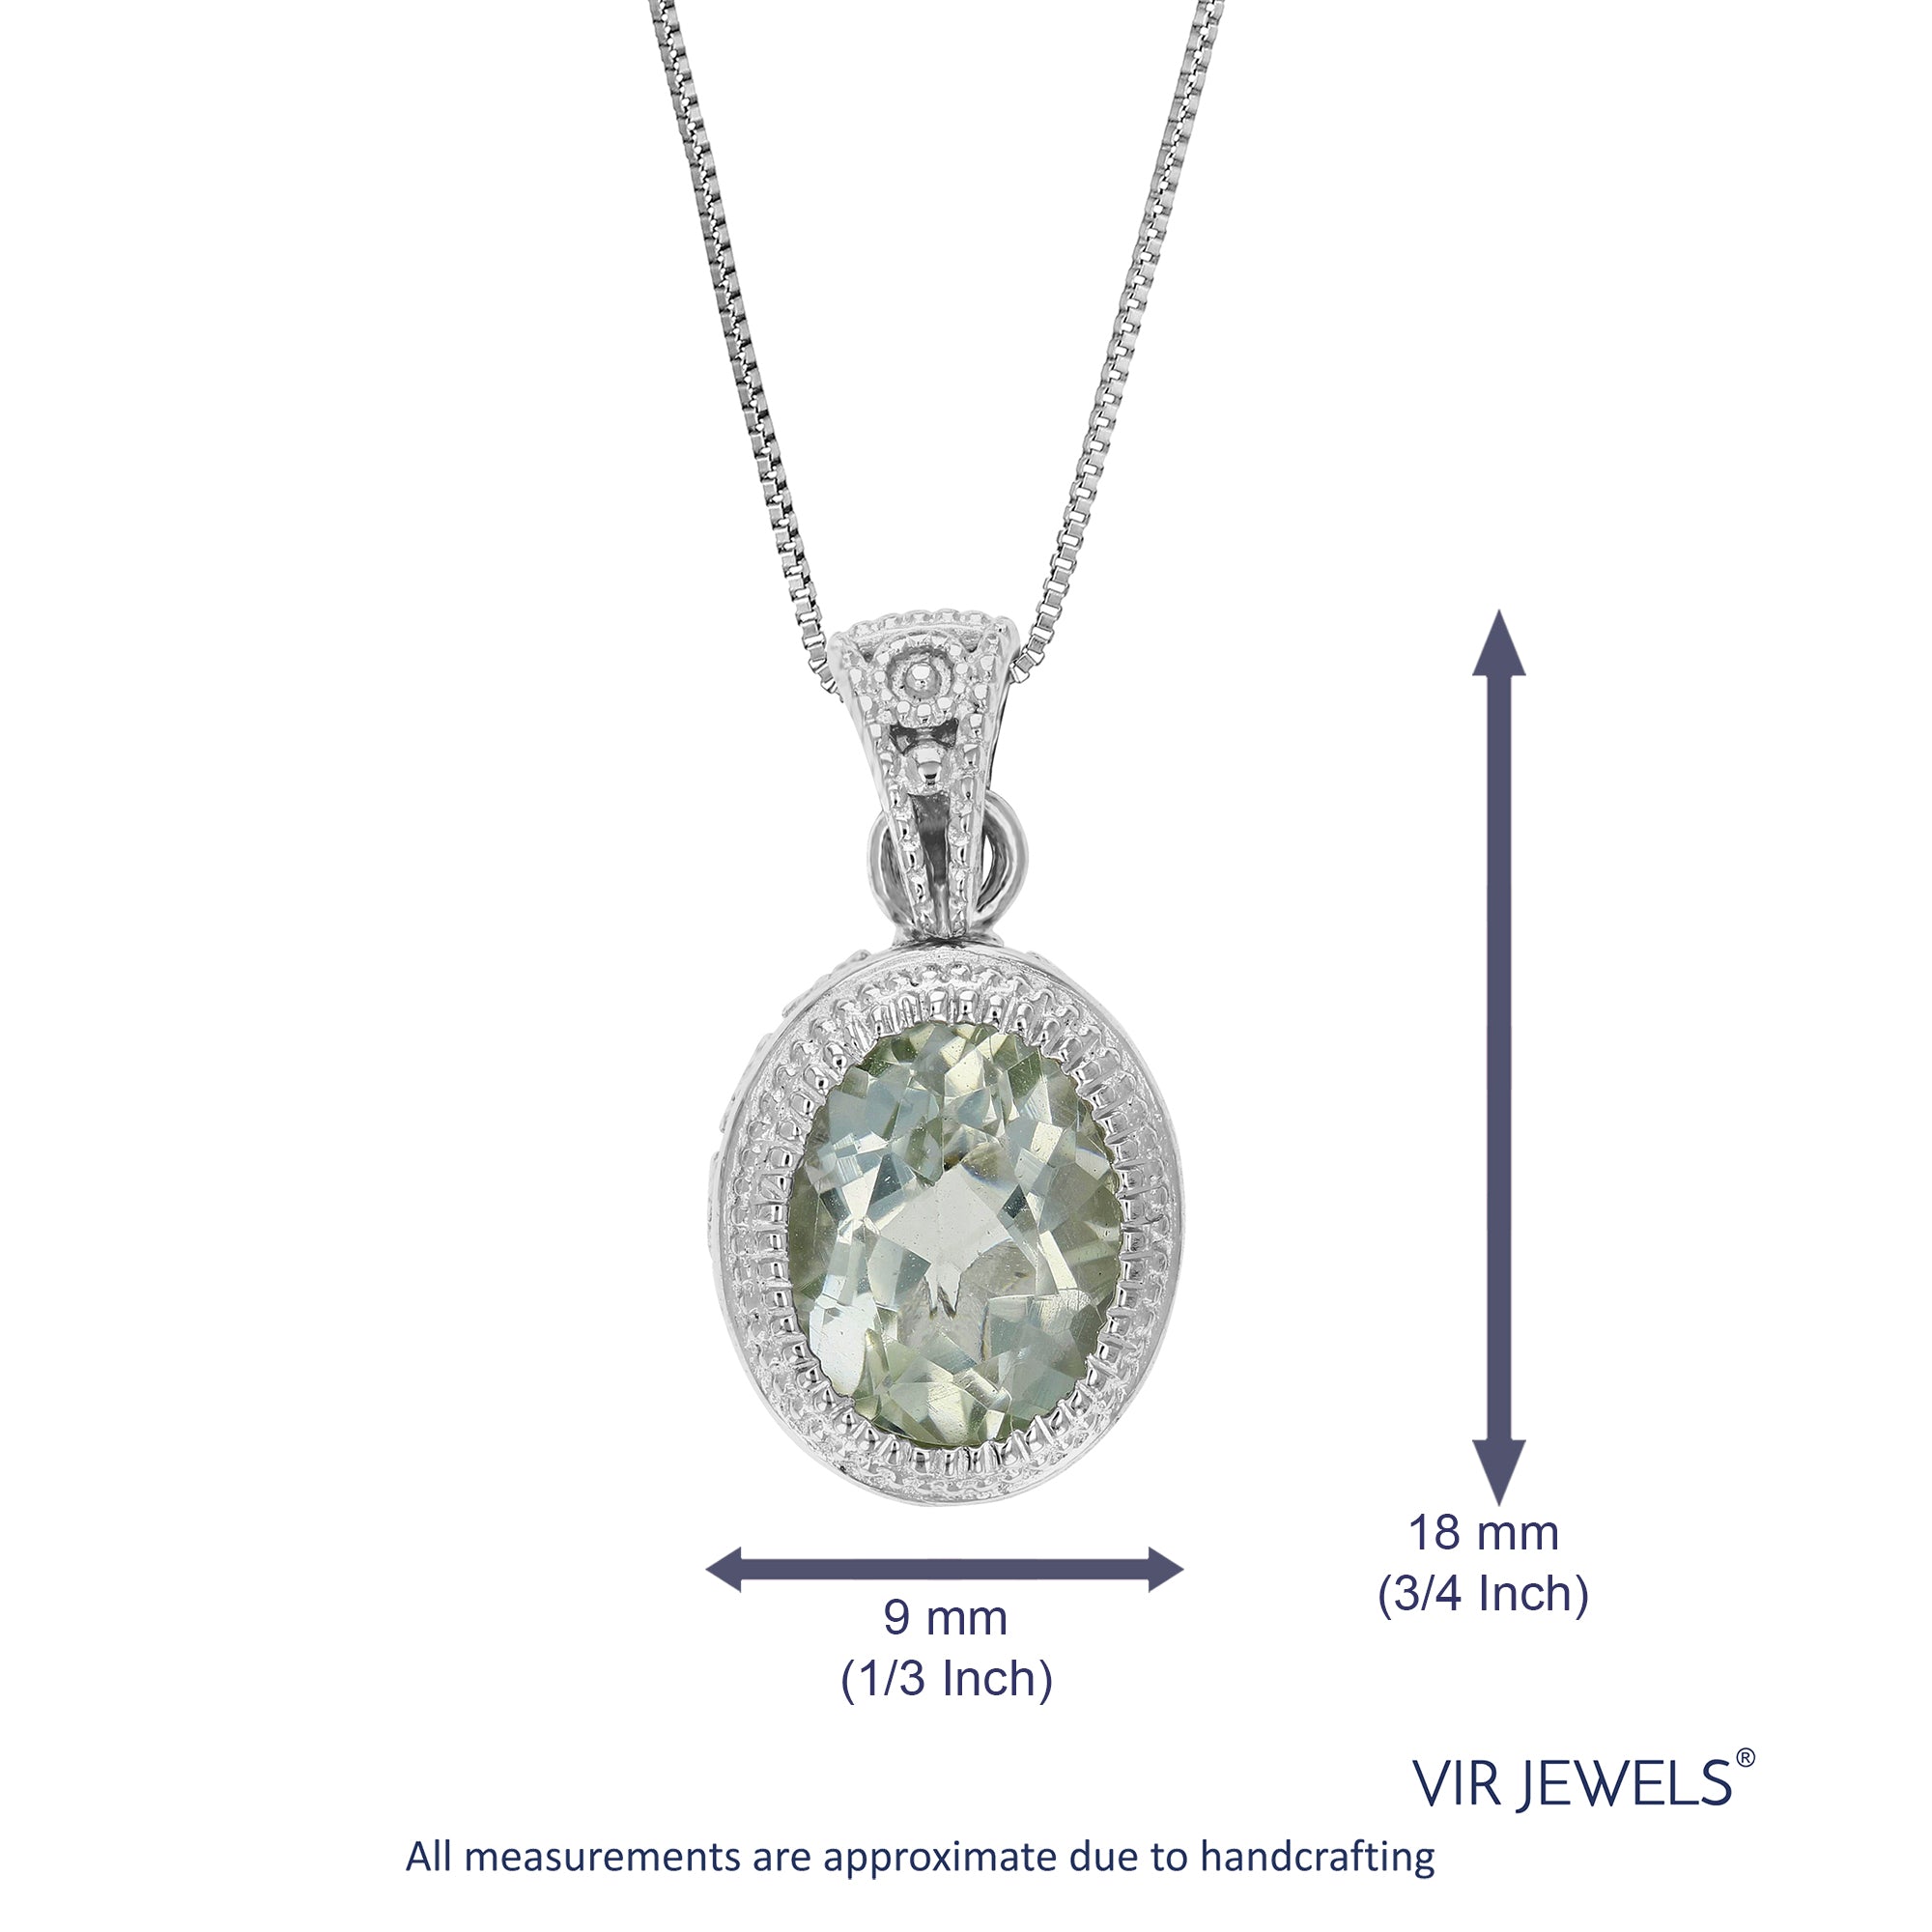 1.10 cttw Pendant Necklace, Green Amethyst Oval Pendant Necklace for Women in .925 Sterling Silver with Rhodium, 18 Inch Chain, Bezel Setting